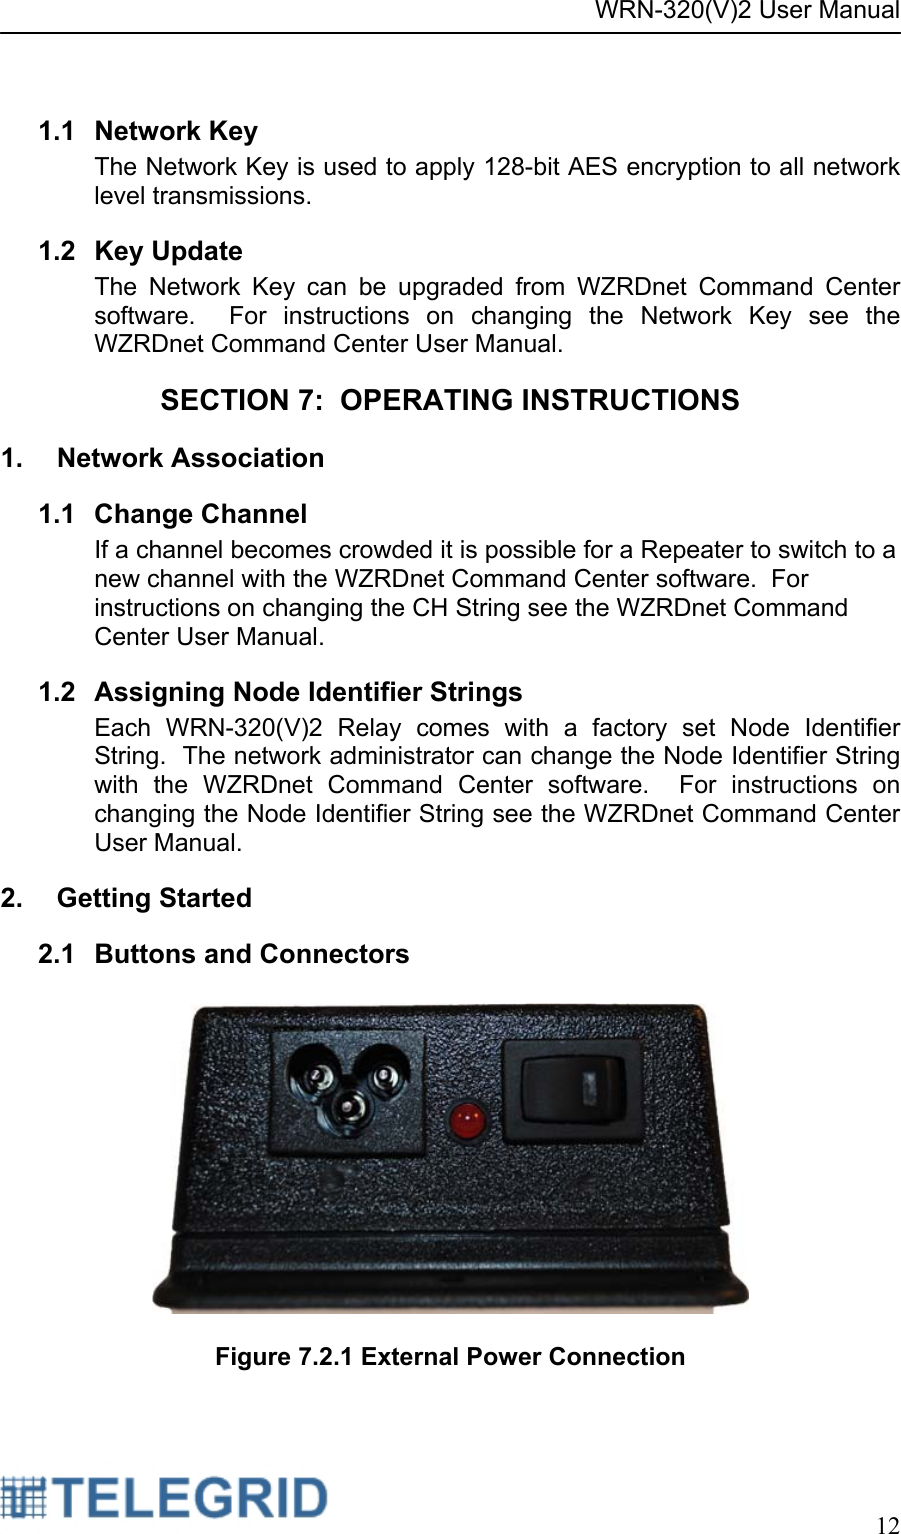 WRN-320(V)2 User Manual     12   1.1 Network Key The Network Key is used to apply 128-bit AES encryption to all network level transmissions.   1.2 Key Update The Network Key can be upgraded from WZRDnet Command Center software.  For instructions on changing the Network Key see the WZRDnet Command Center User Manual.   SECTION 7:  OPERATING INSTRUCTIONS 1.  Network Association  1.1 Change Channel If a channel becomes crowded it is possible for a Repeater to switch to a new channel with the WZRDnet Command Center software.  For instructions on changing the CH String see the WZRDnet Command Center User Manual.   1.2  Assigning Node Identifier Strings Each WRN-320(V)2 Relay comes with a factory set Node Identifier String.  The network administrator can change the Node Identifier String with the WZRDnet Command Center software.  For instructions on changing the Node Identifier String see the WZRDnet Command Center User Manual.   2. Getting Started 2.1 Buttons and Connectors    Figure 7.2.1 External Power Connection 